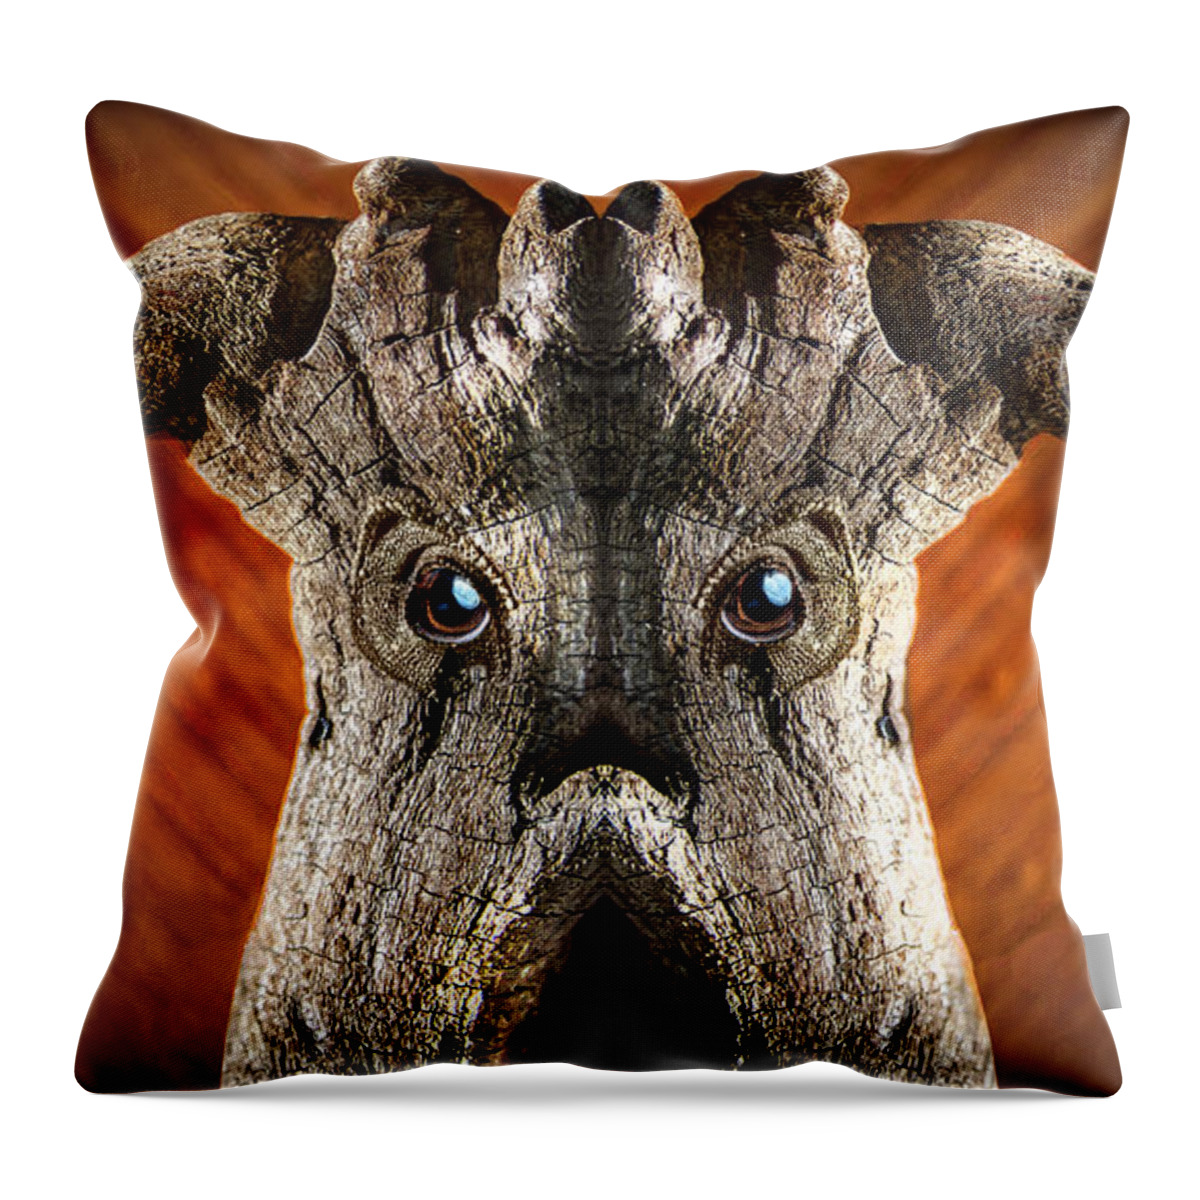 Wood Throw Pillow featuring the digital art Woody 201 by Rick Mosher